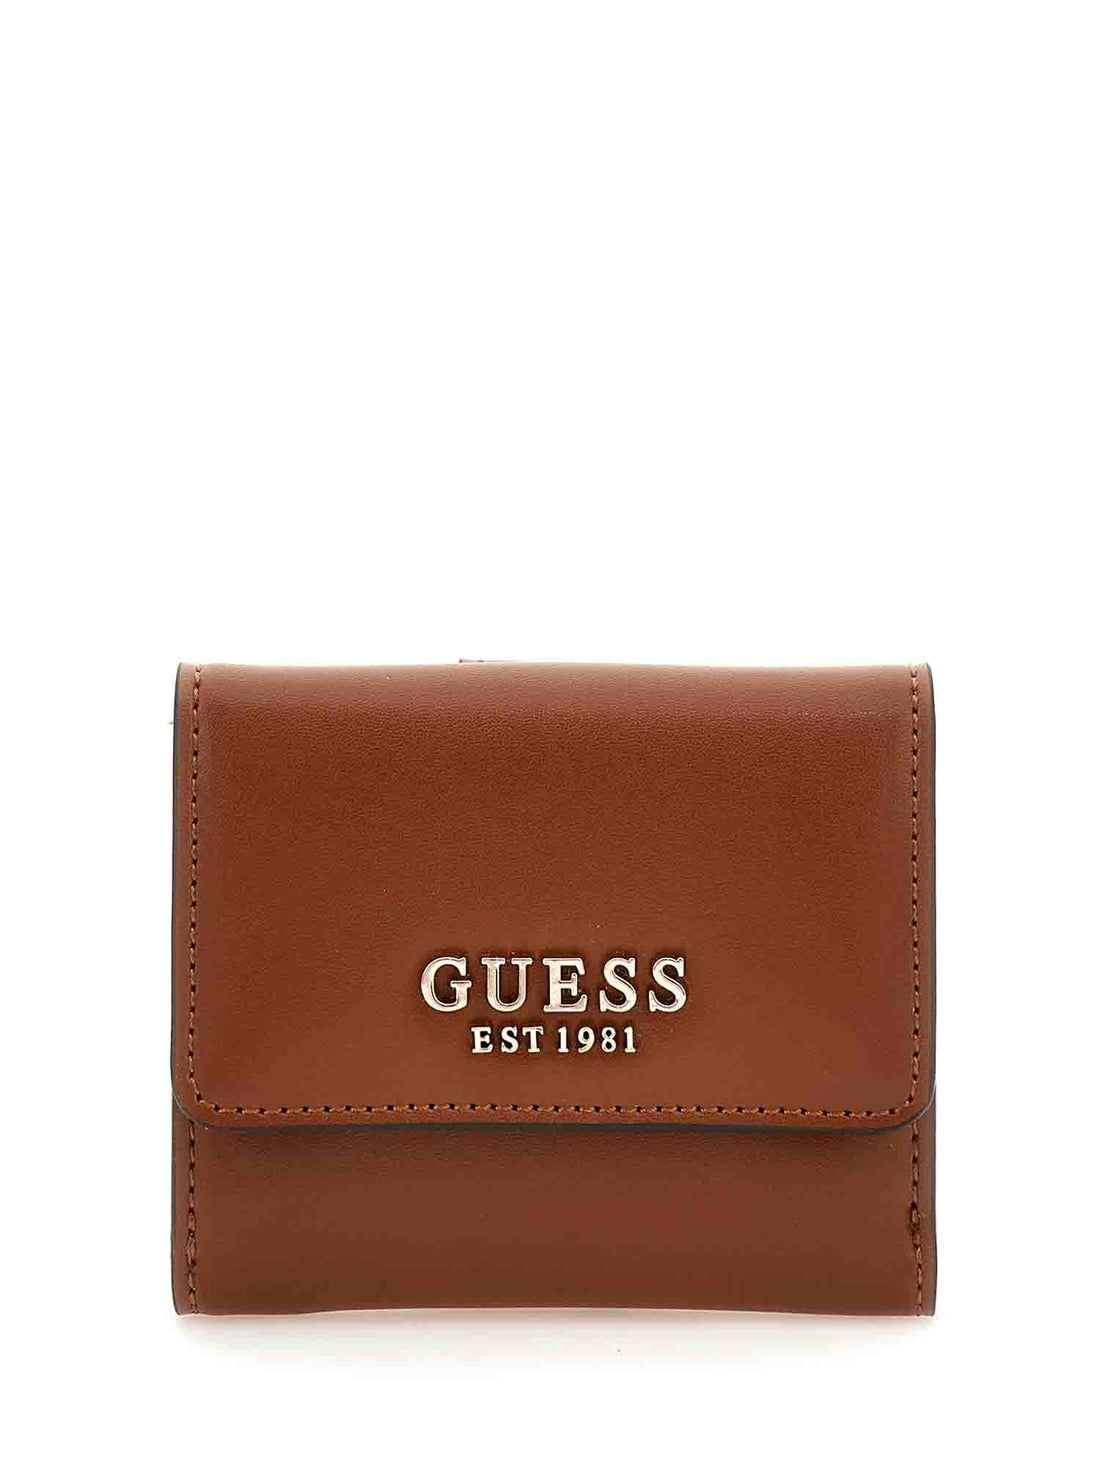 Guess Wallet SWVG85 00440